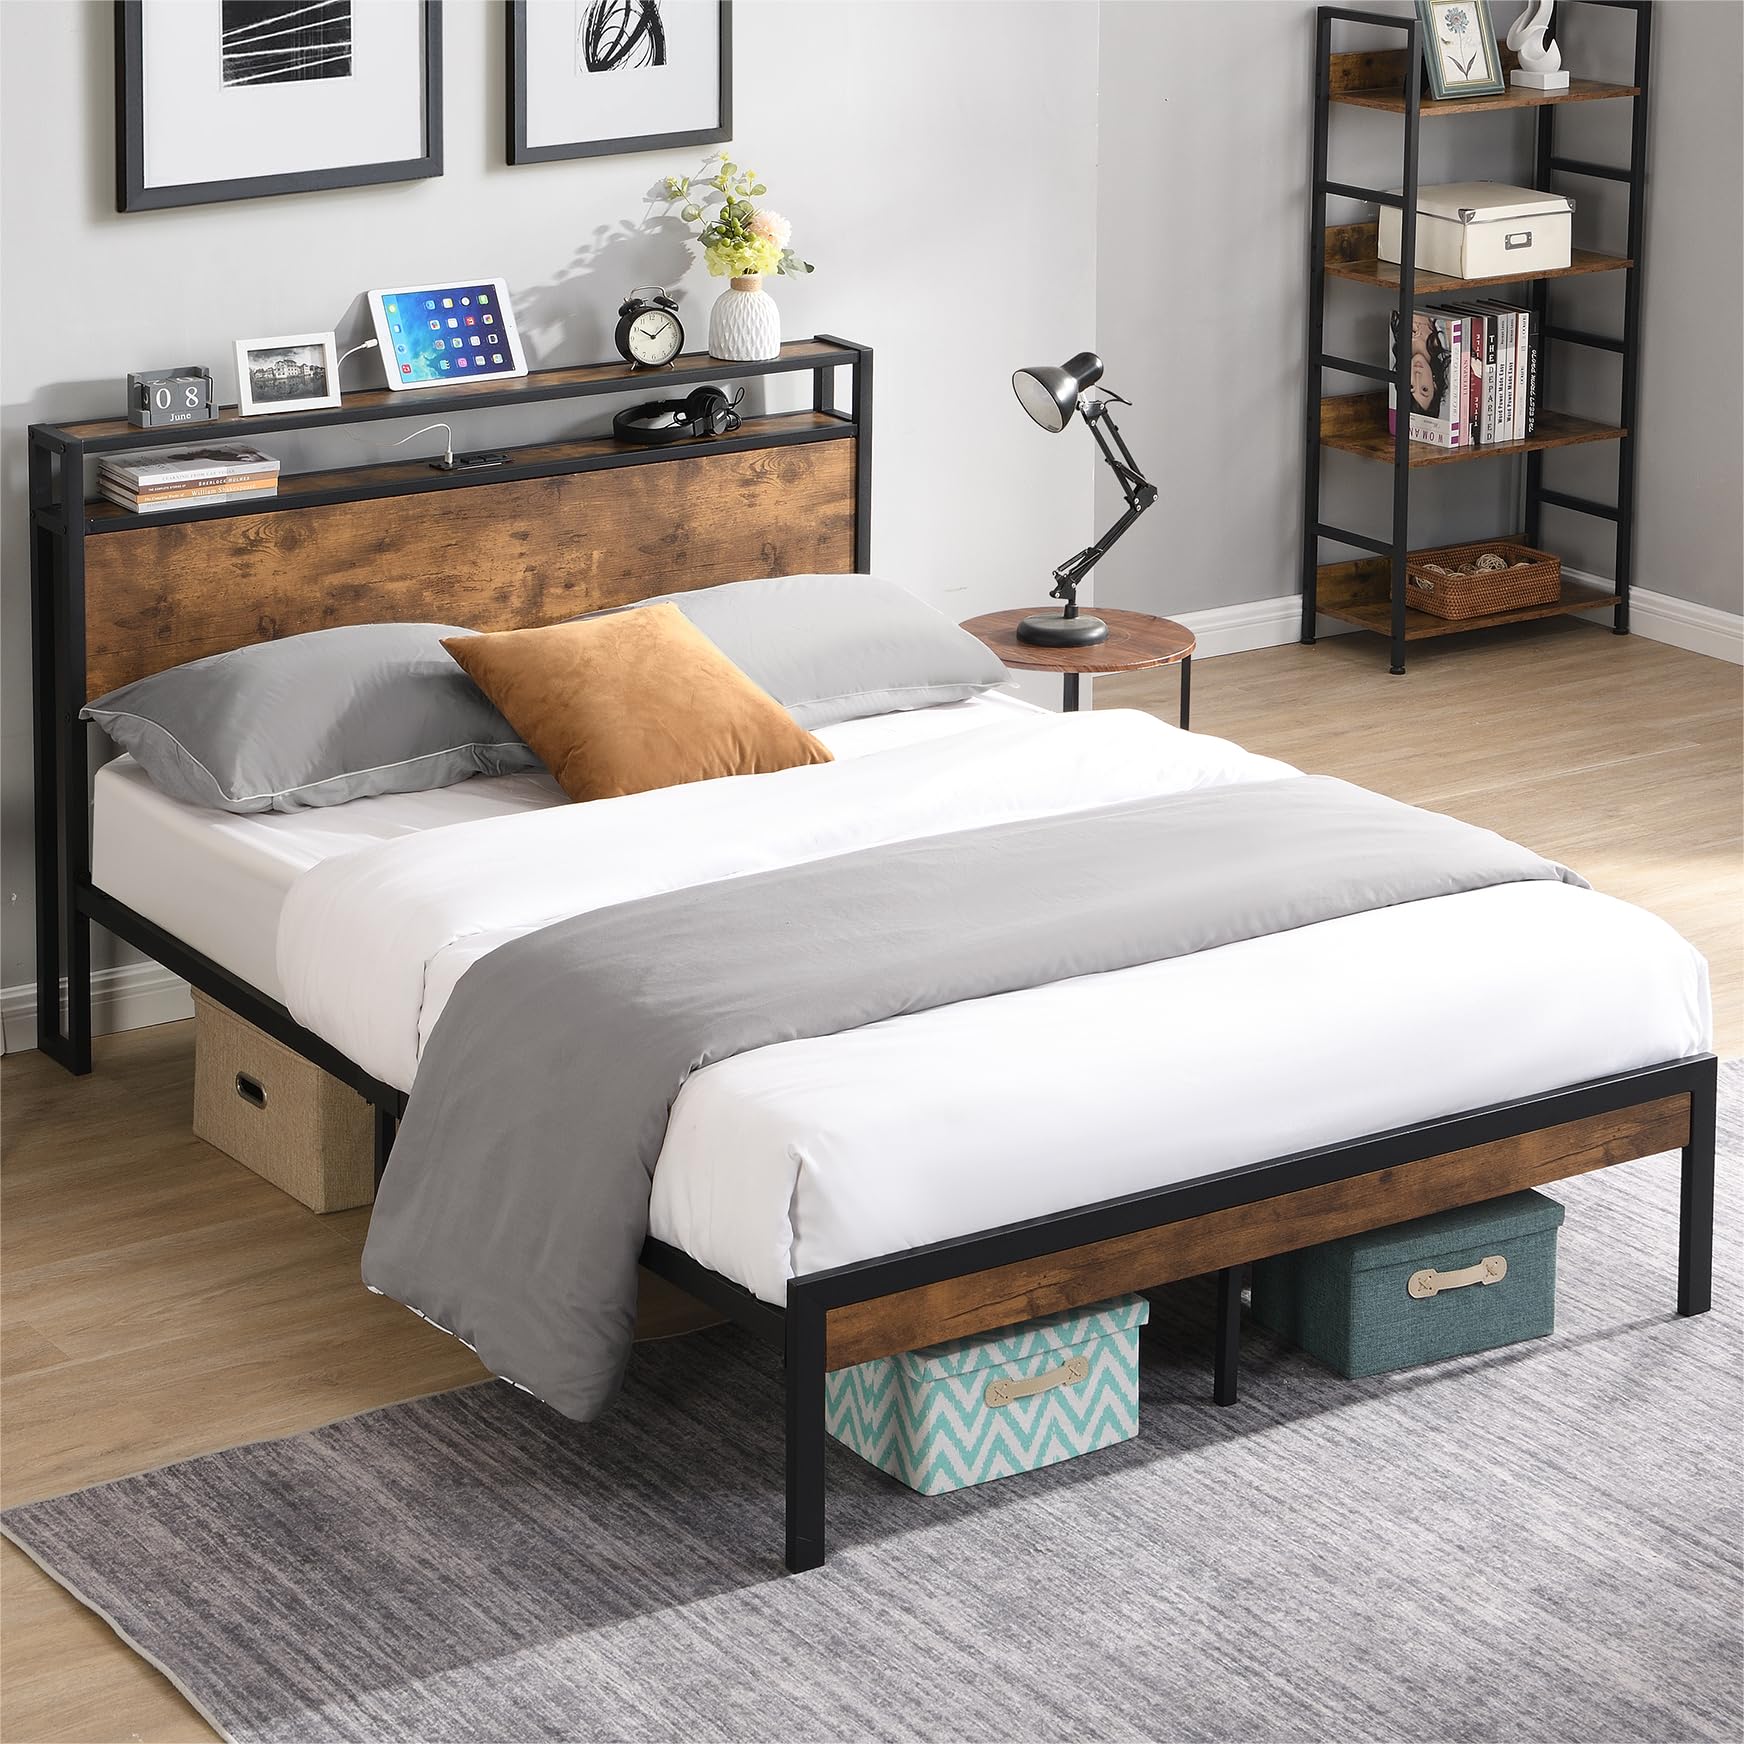 QKFF Full Size Bed Frame, Metal Bed Frame with Wooden Storage Headboard Outlet & USB Port, Solid and Stable, Noise Free, No Box Spring Needed (Full)